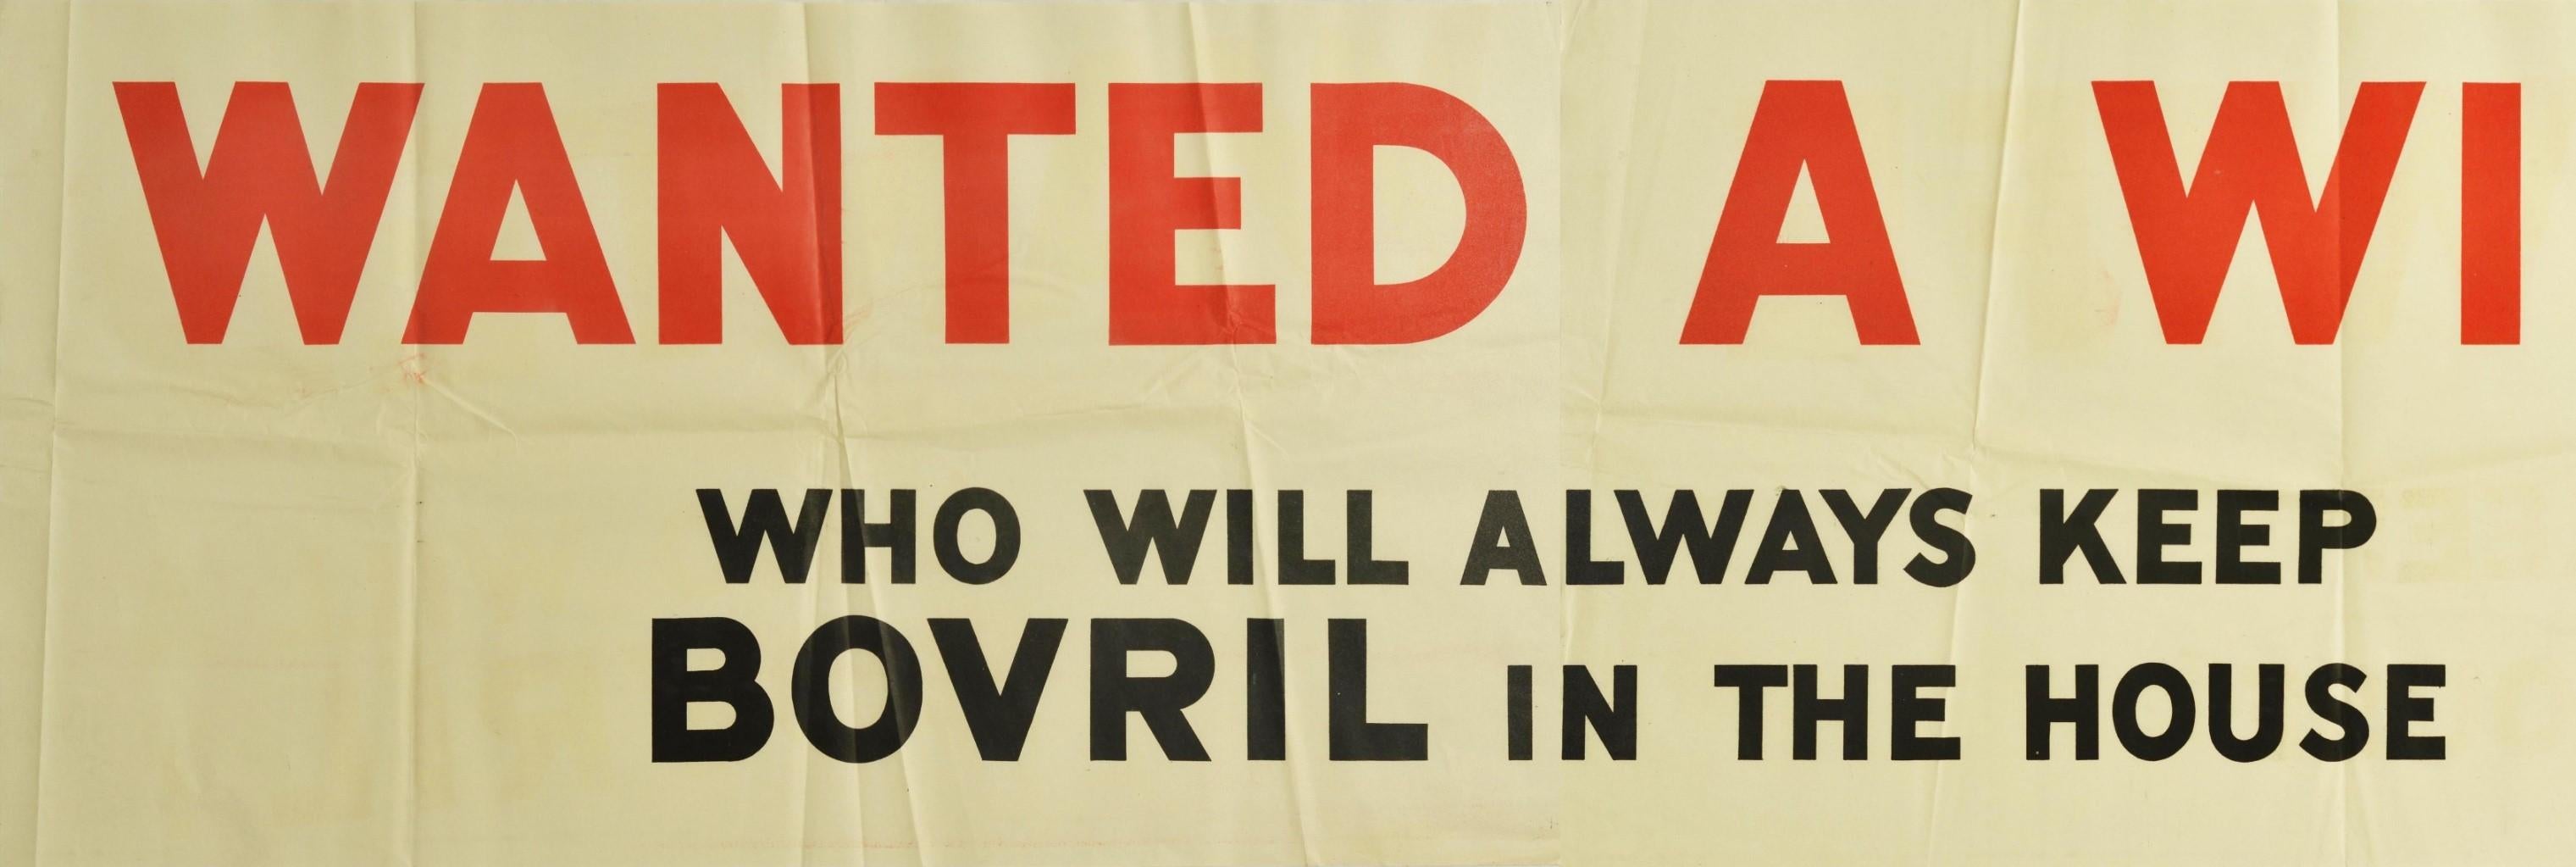 British Original Vintage Poster Wanted A Wife Who Will Always Keep Bovril In The House